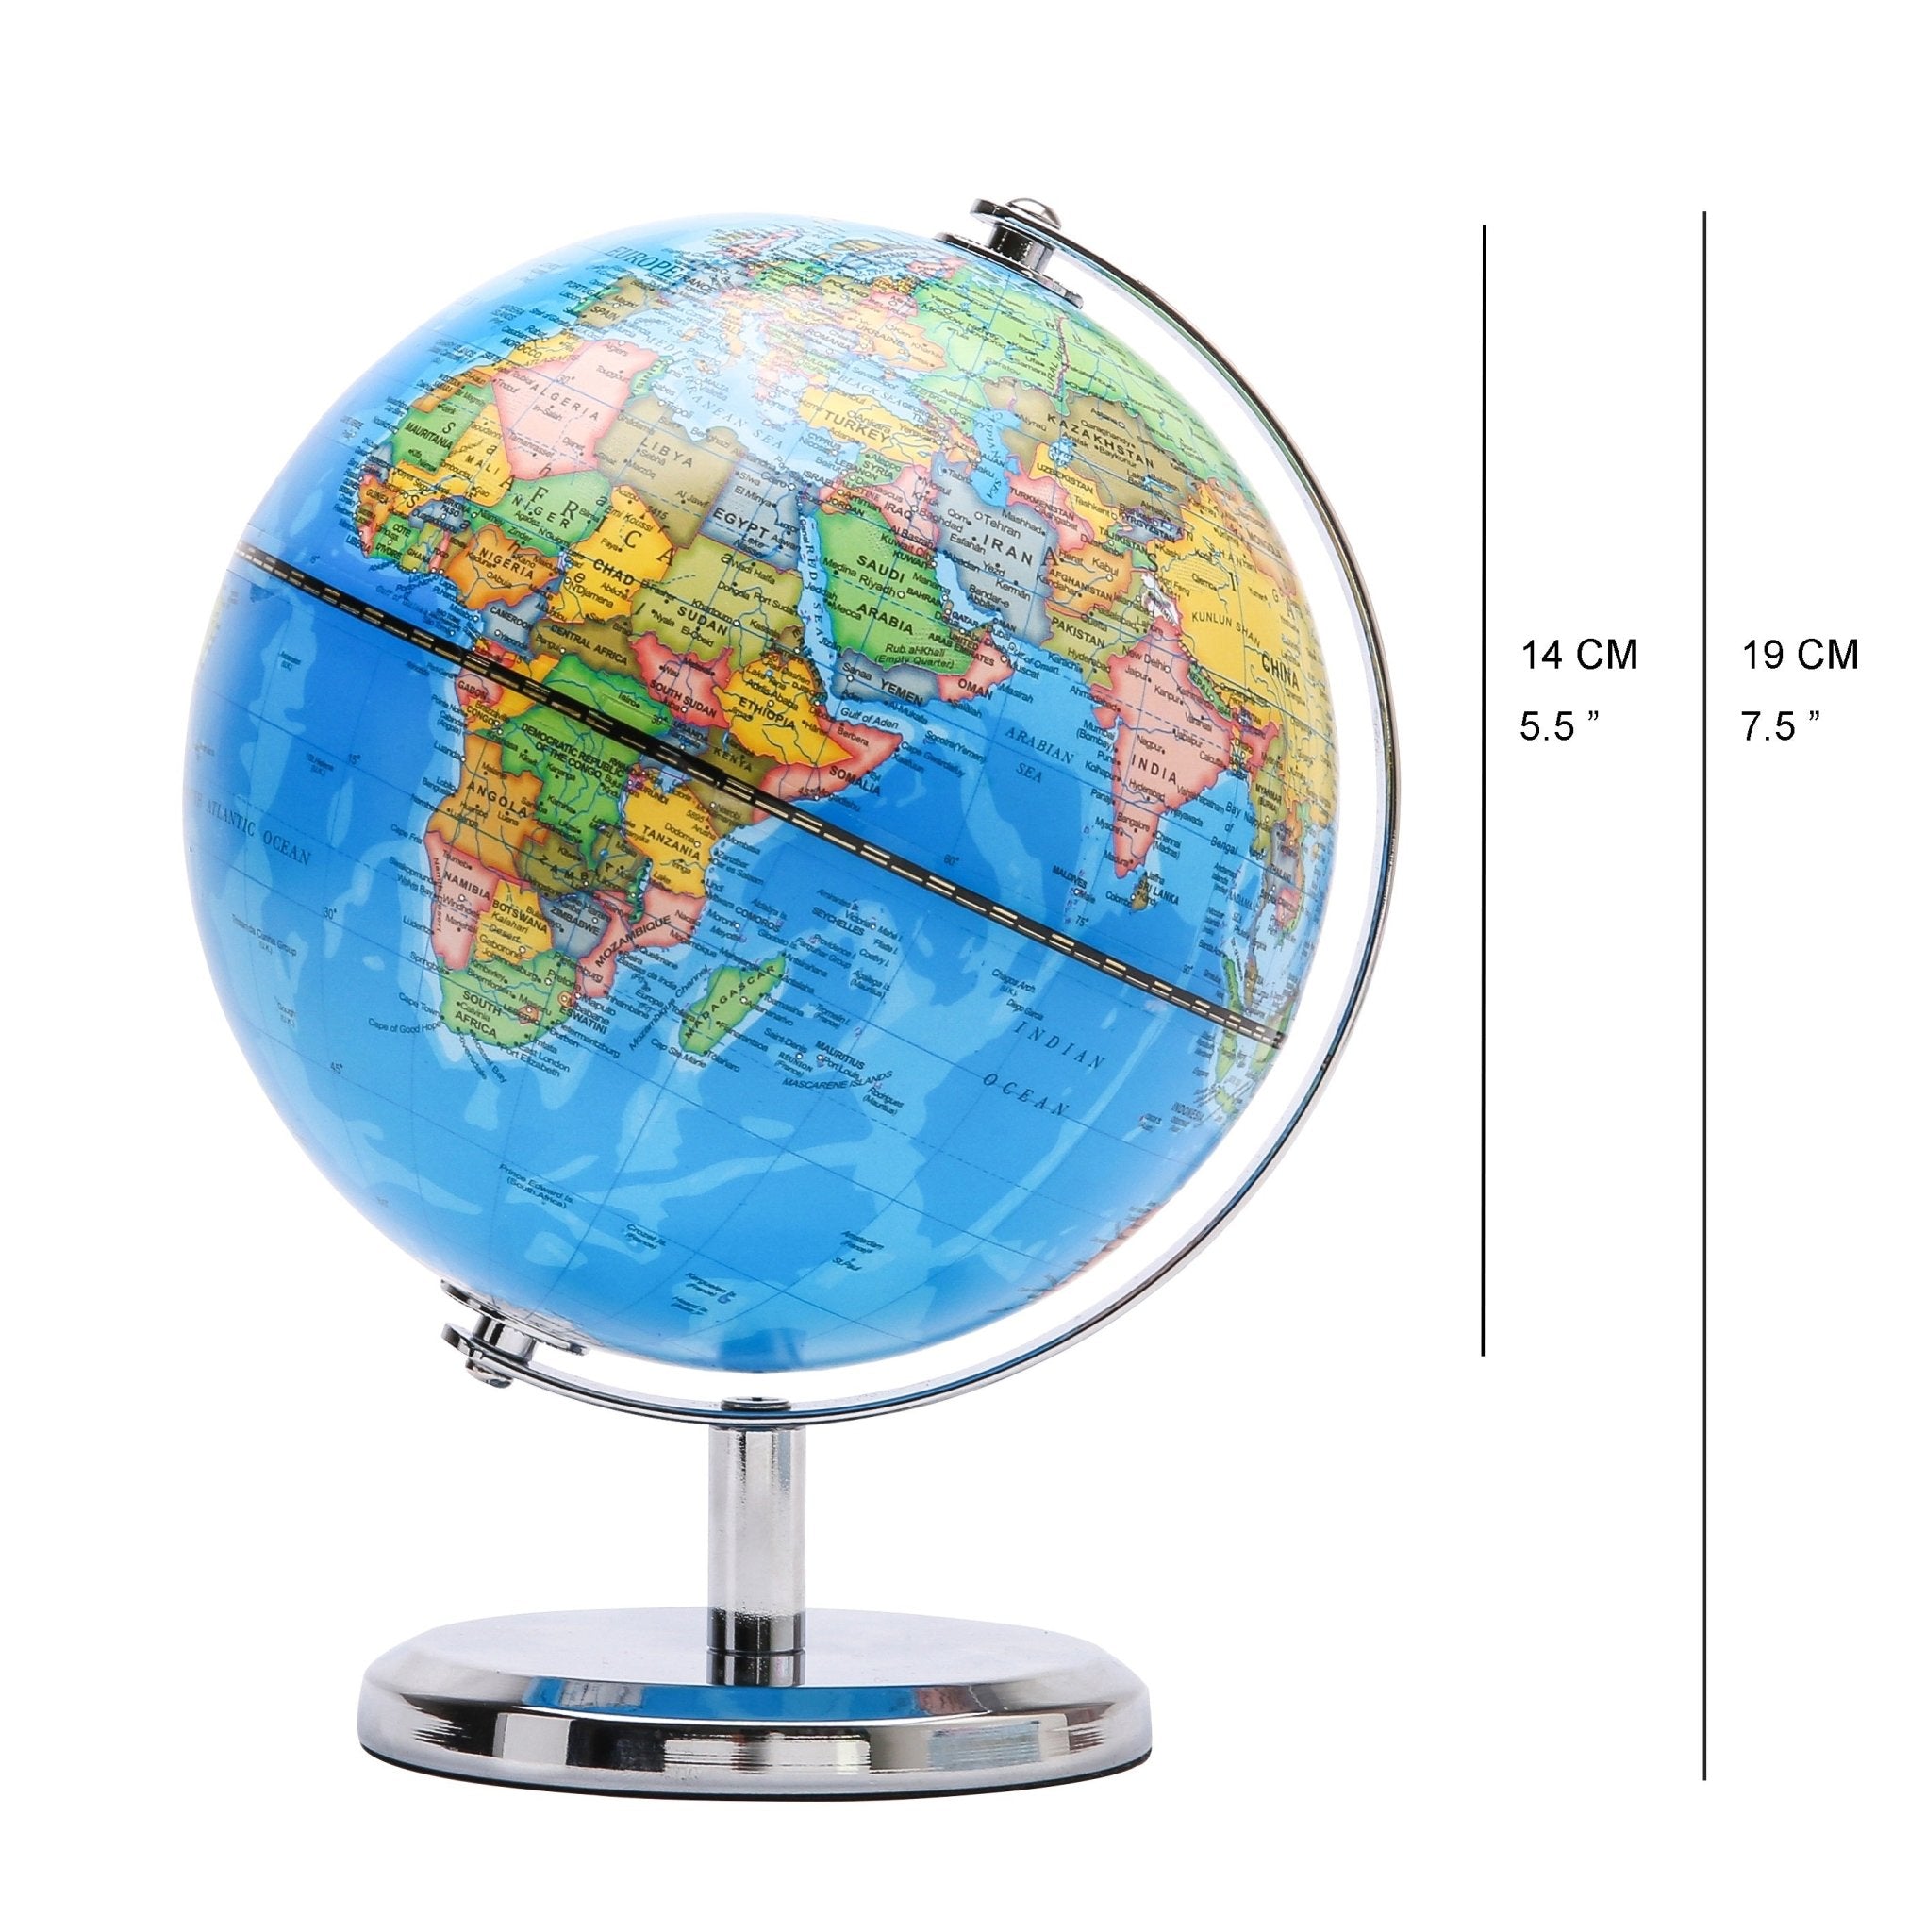 Topglobe 14cm World Globe - Stainless Steel Arc and Base 